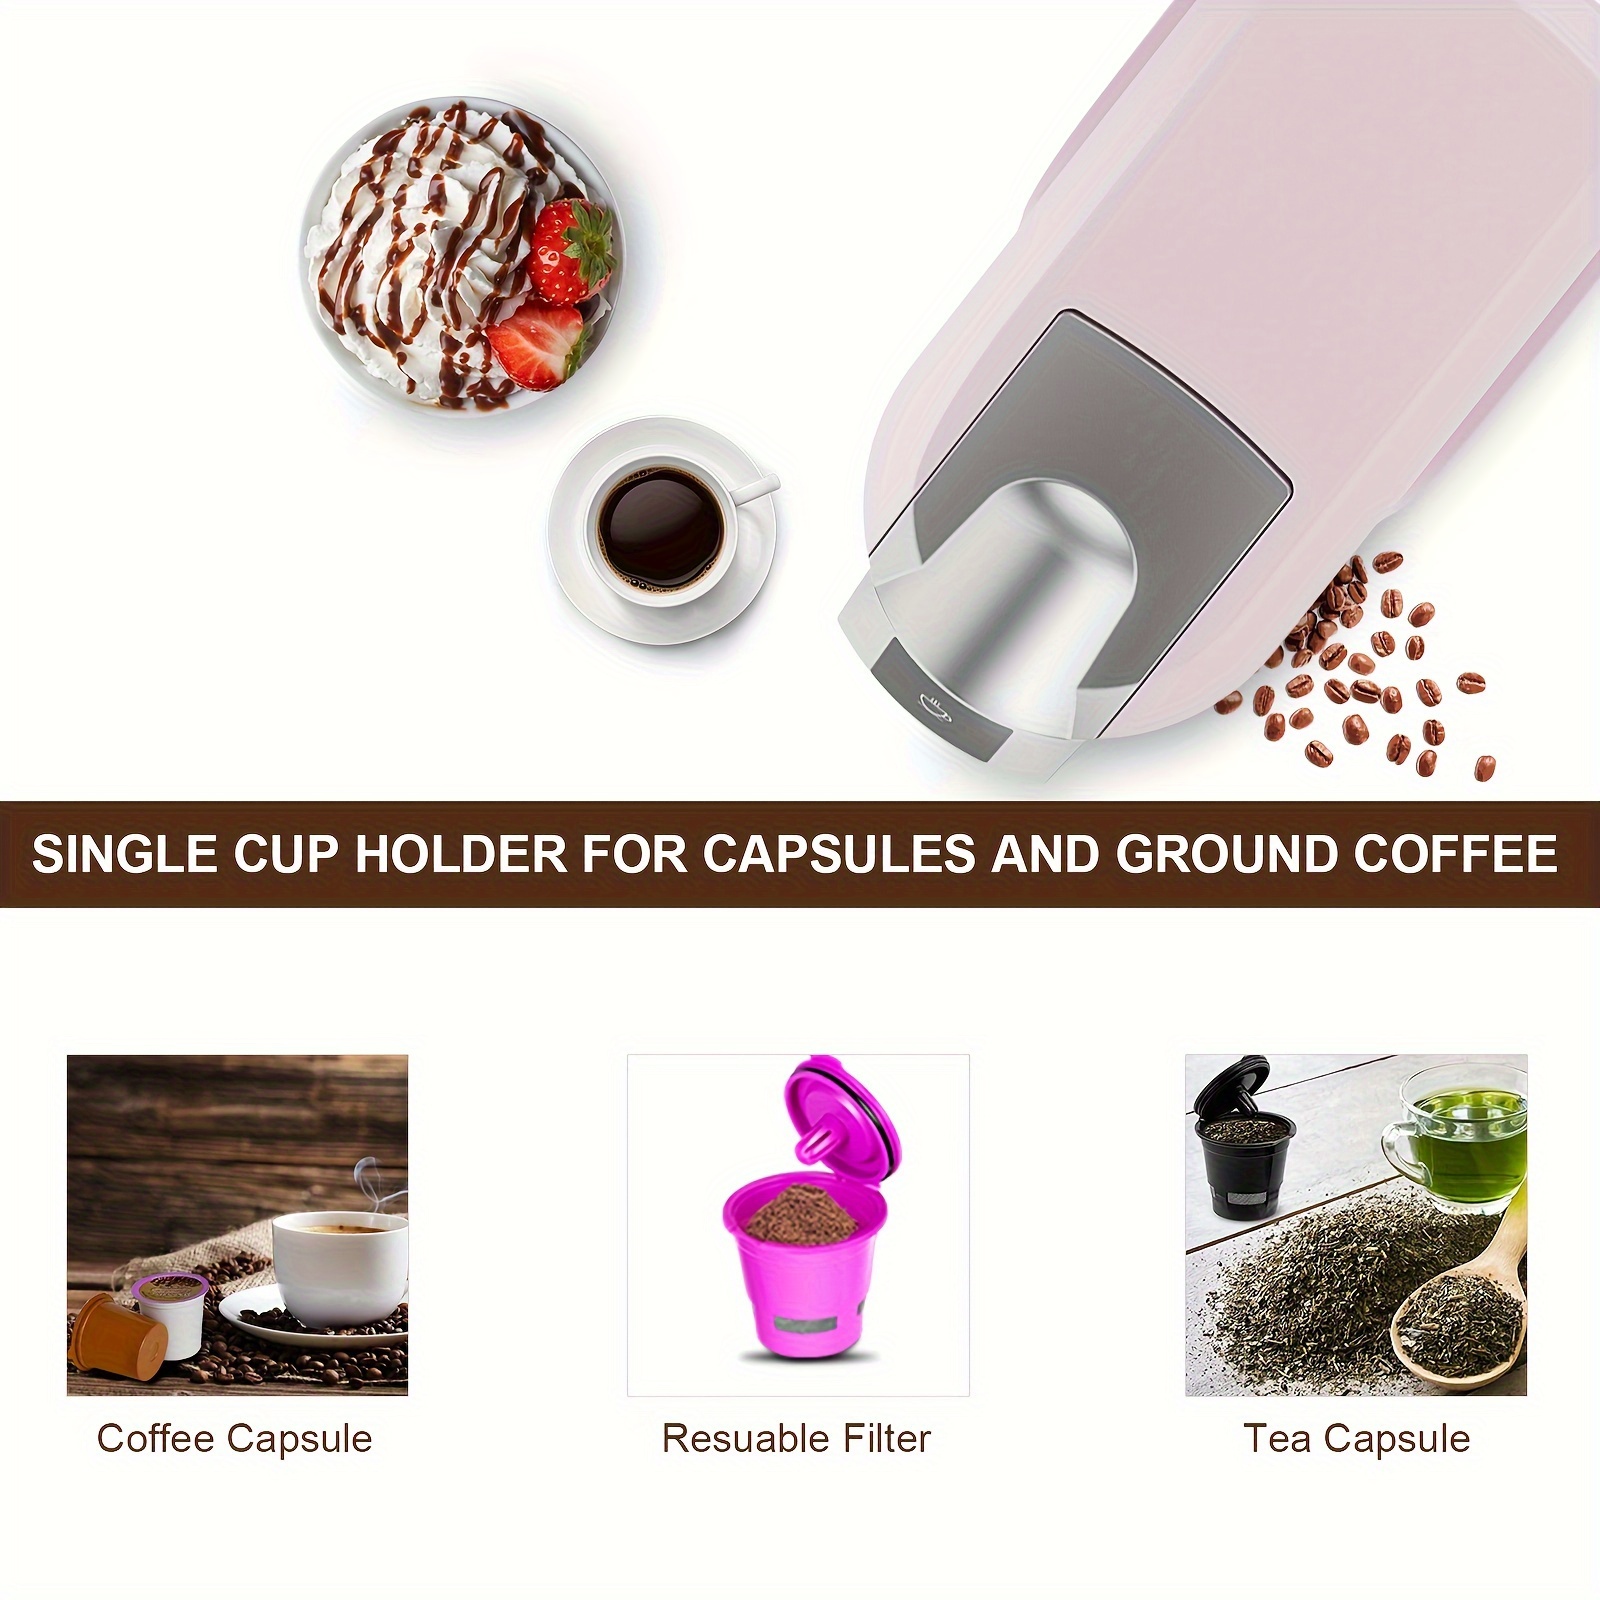 1pc coffee brewer chulux pink single serve coffee maker 3 in 1 machine for k cups pods and ground coffee fast brewing in minutes auto shut off includes coffee tool